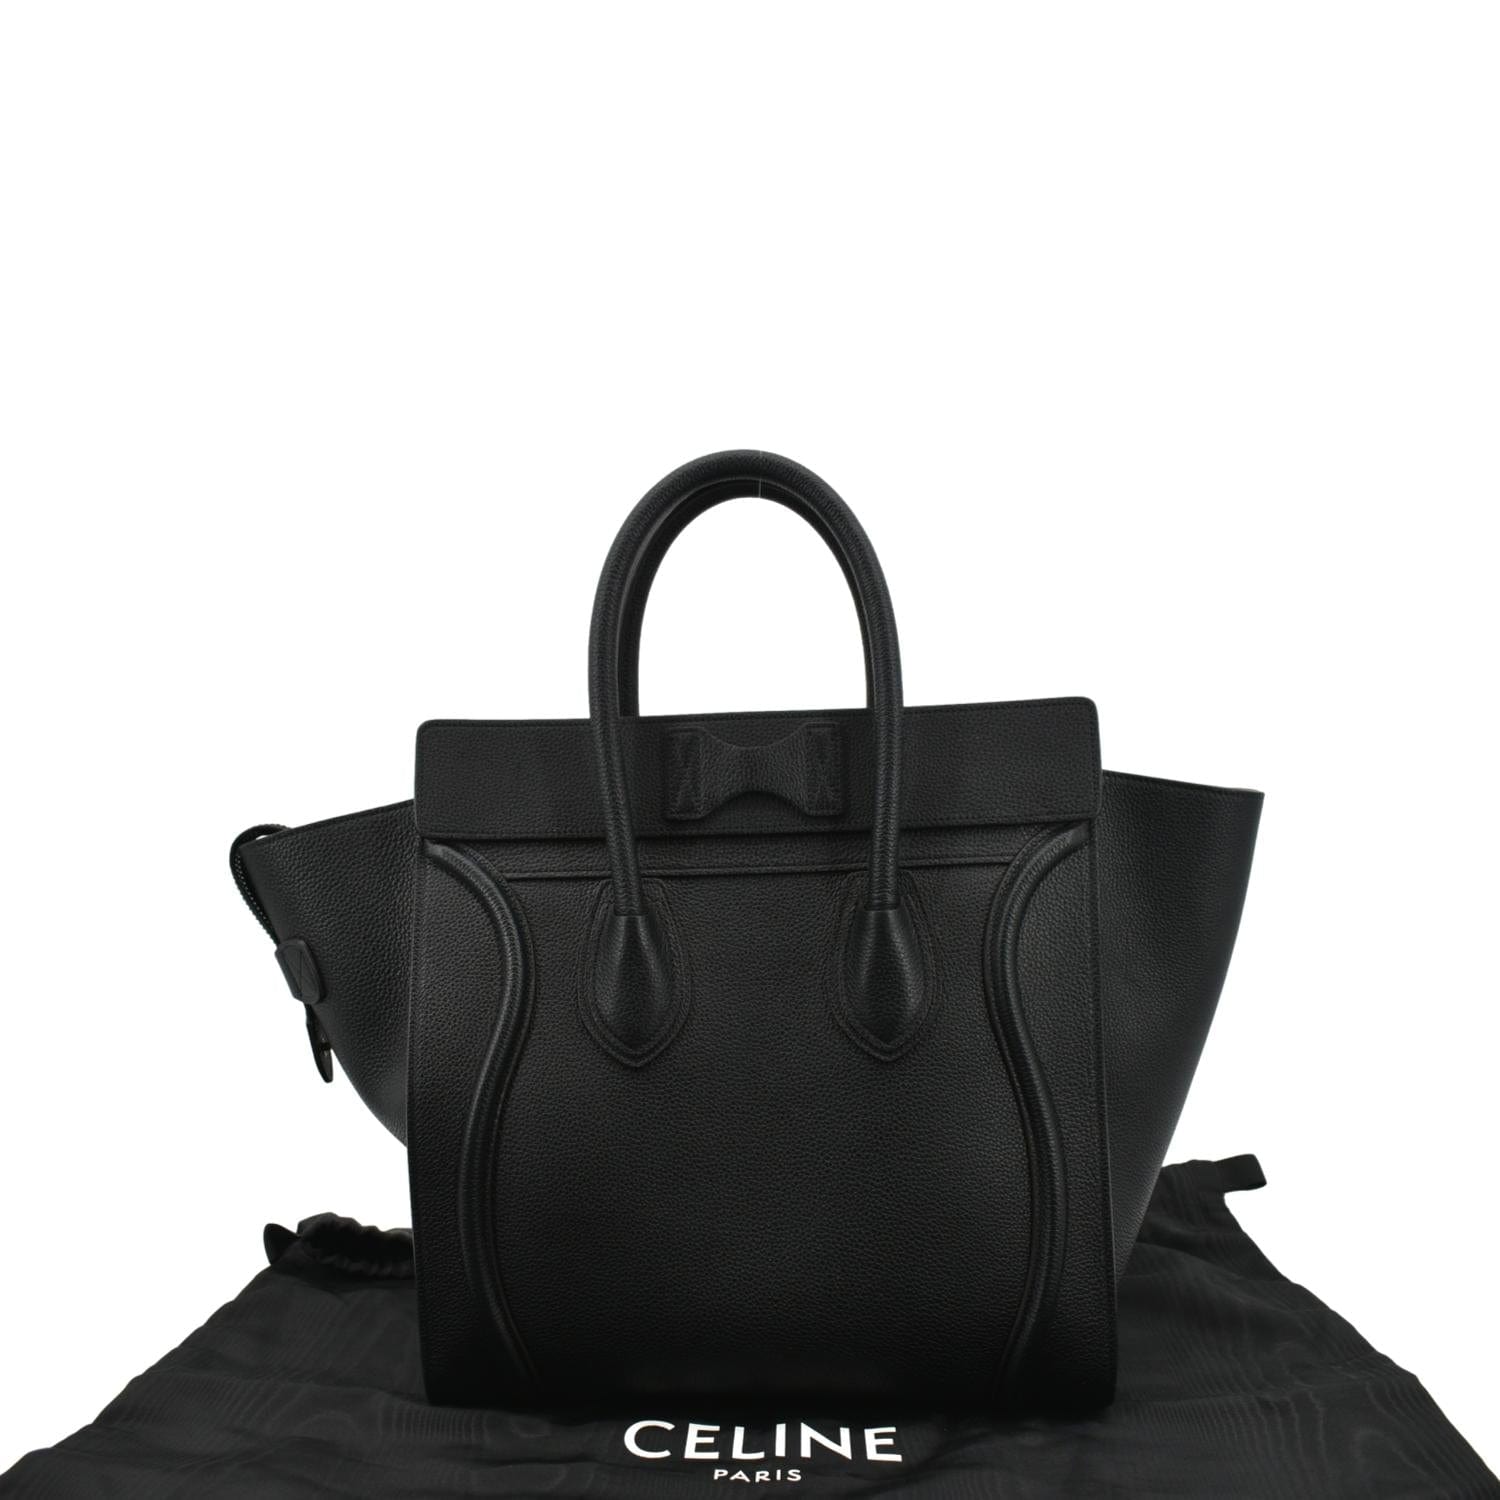 Celine Luggage Bag Micro Leather And Suede Black And White - Authentic